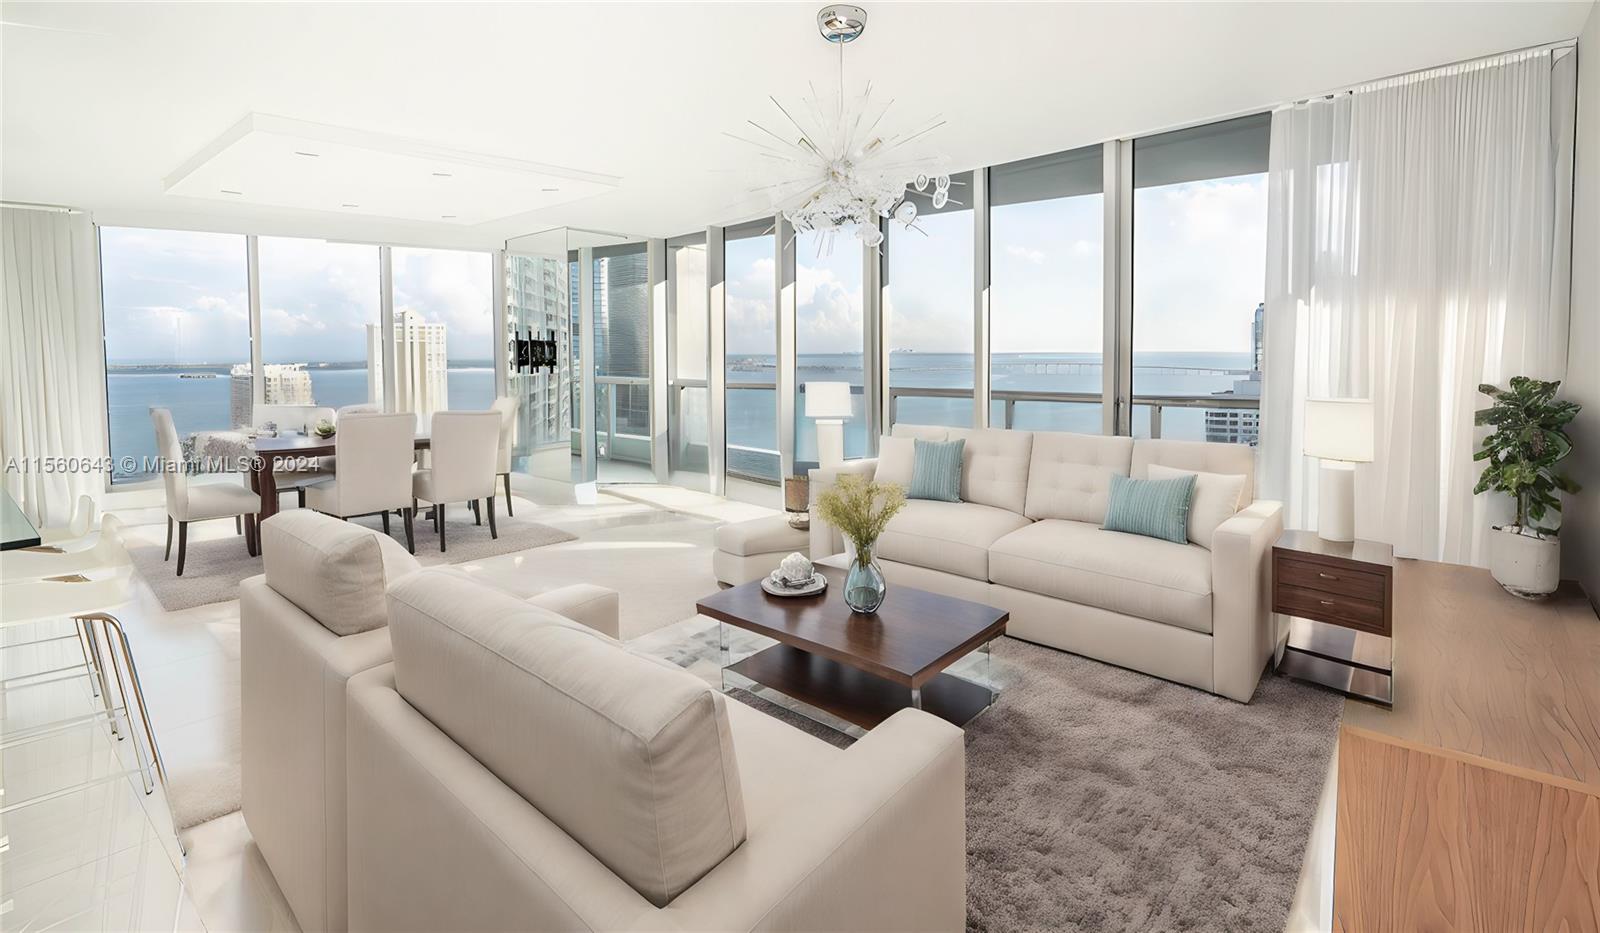 BEST PRICE FOR A HIGH FLOOR in Icon Brickell by Philippe Starck. This bright 3/2 corner unit in the coveted 01-line! Enjoy spacious layouts, stunning high-floor water views, & high-quality upgrades like premium marble flooring, luxurious bathroom cabinets, custom closets, designer doors, & more. Icon Brickell, known for its 5-star resort amenities and prime Brickell location, is home to two elite restaurants. Just a short walk to Brickell City Center, Whole Foods, and endless entertainment options. Enjoy the largest residential condo pool in the area, offering a resort-style oasis for relaxation. Stay fit in the incredible fitness center equipped with state-of-the-art facilities and indulge in the ultimate relaxation at the attended spa and lavish baths. NO SPECIAL ASSESSMENTS!